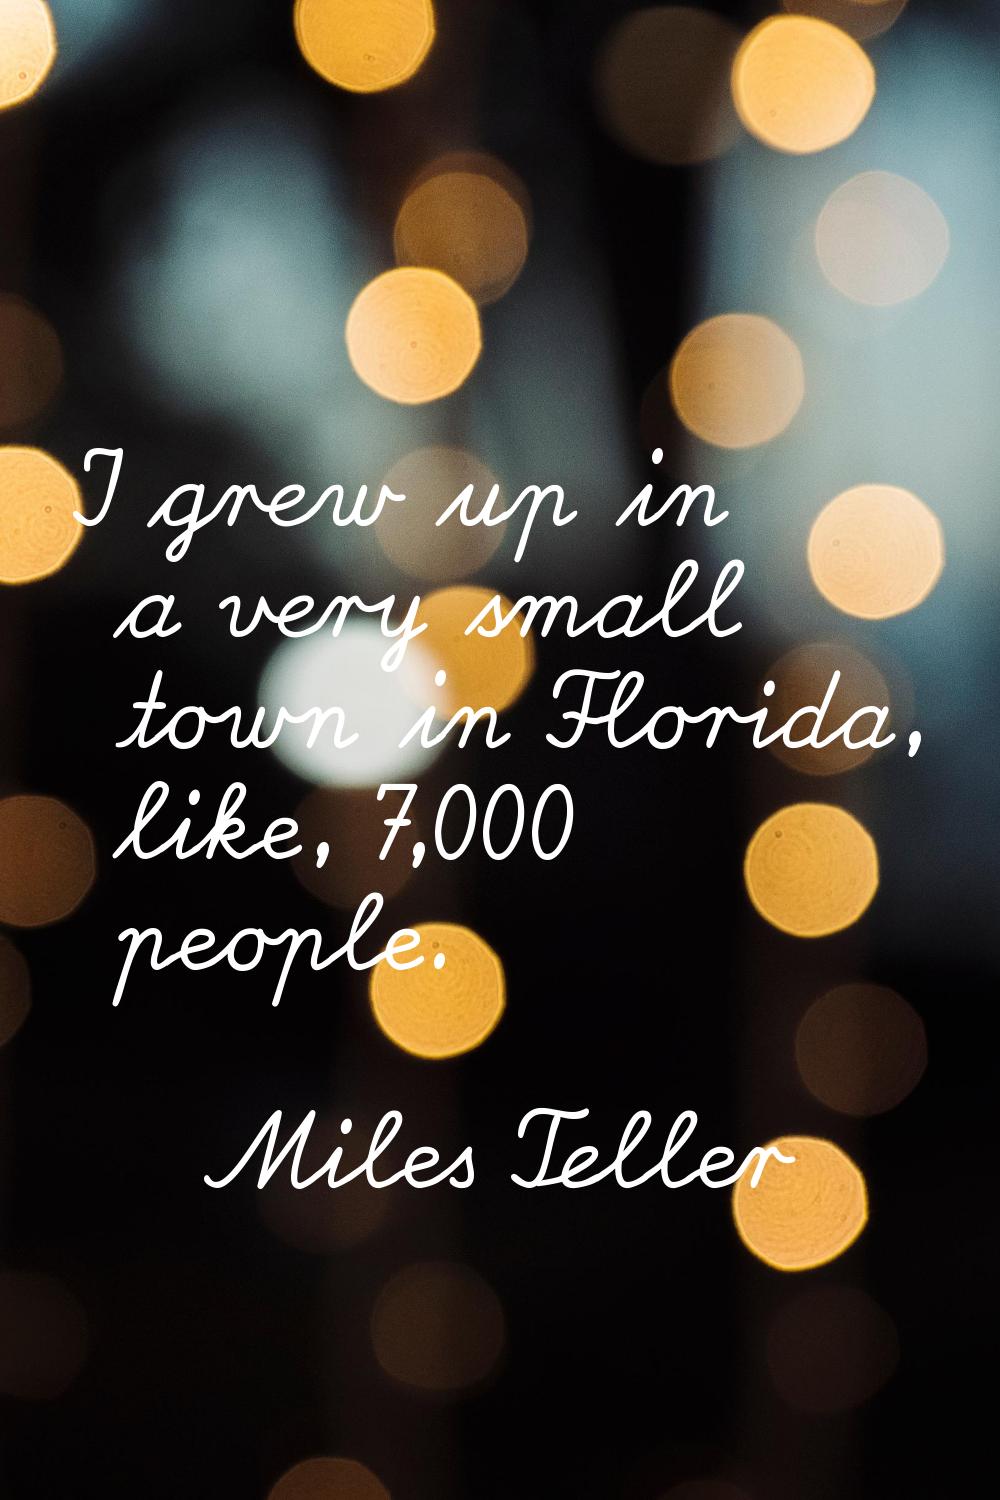 I grew up in a very small town in Florida, like, 7,000 people.